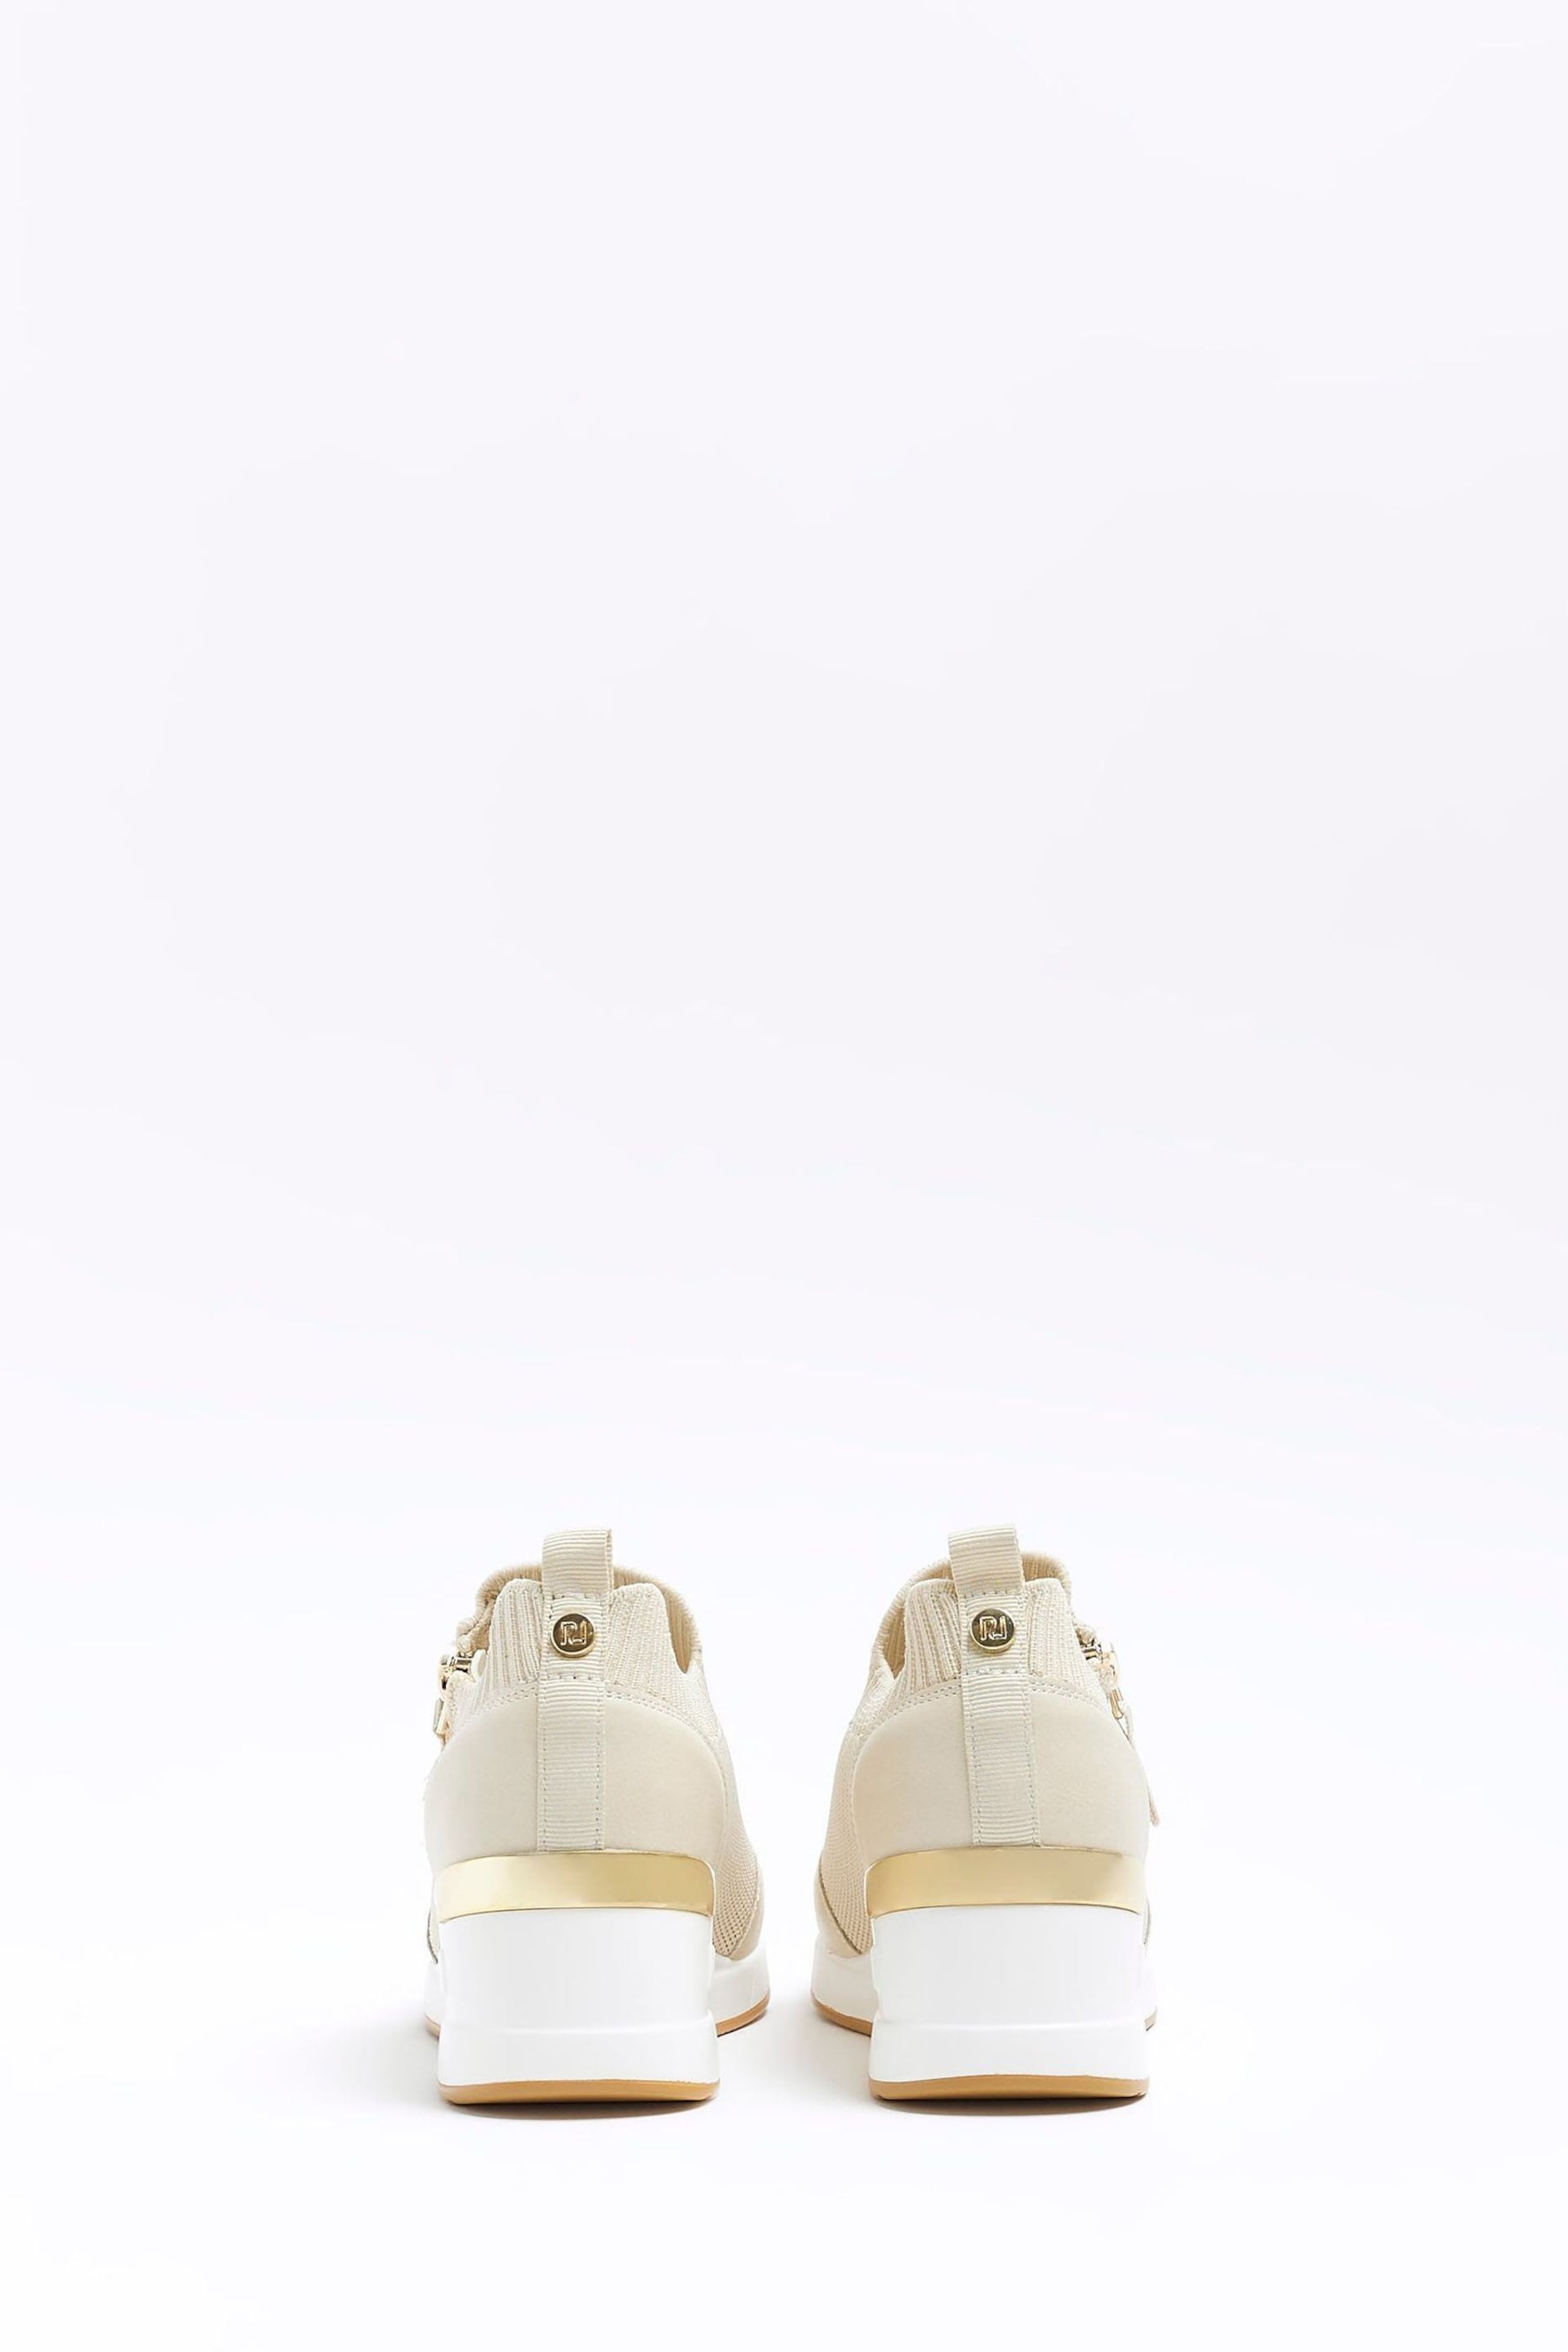 River Island Brown Girls Drenched Wedge Trainers - Image 4 of 4